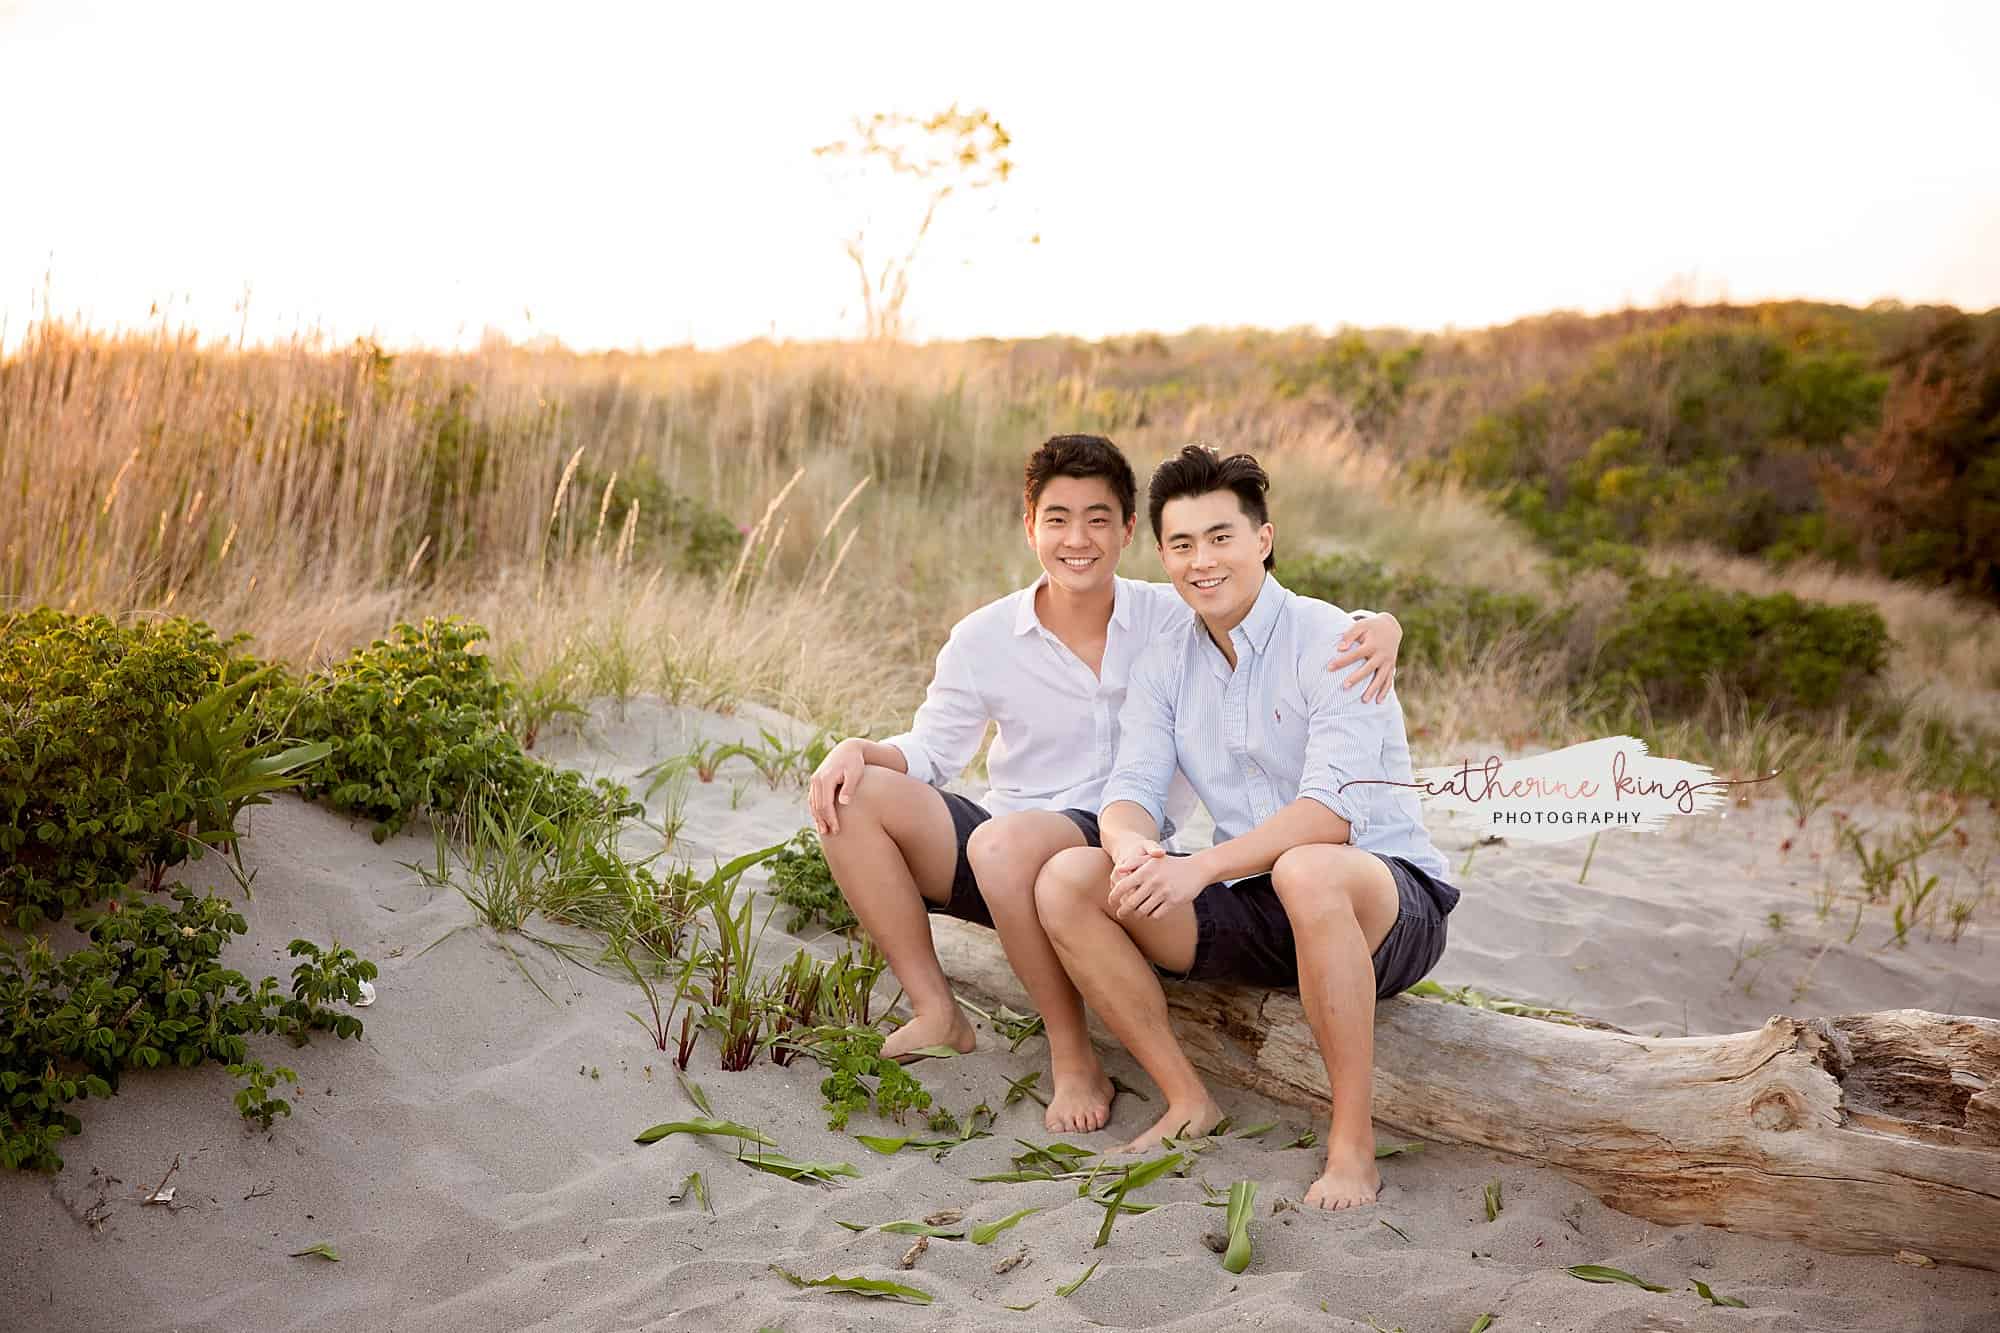 Gorgeous sunset family photography at the beach in Madison CT 